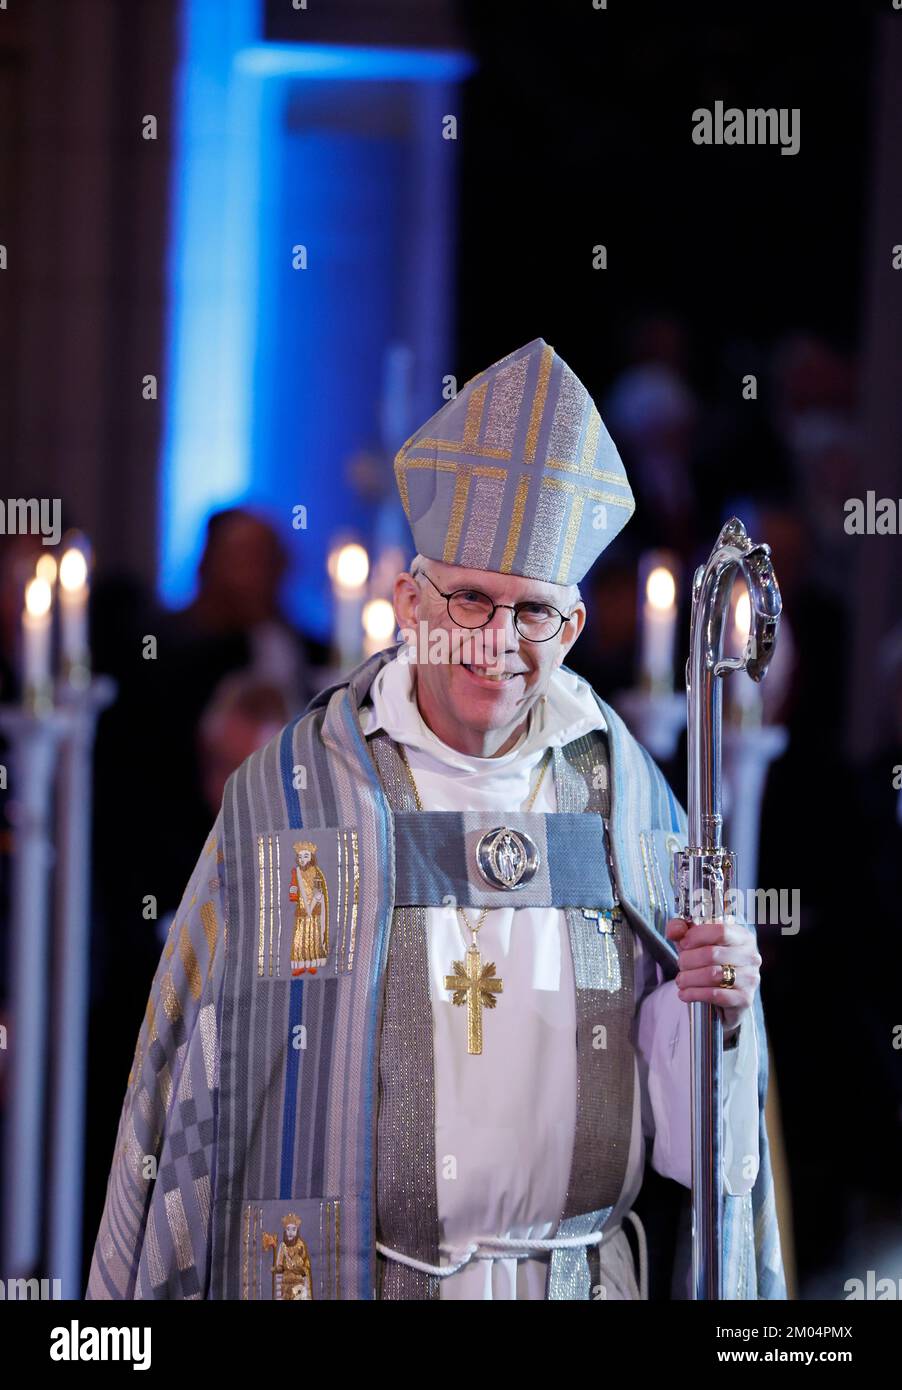 The new Archbishop Martin Modéus during his installation service held at Uppsala Cathedral in Uppsala, Sweden December 4, 2022Photo: Christine Olsson Stock Photo